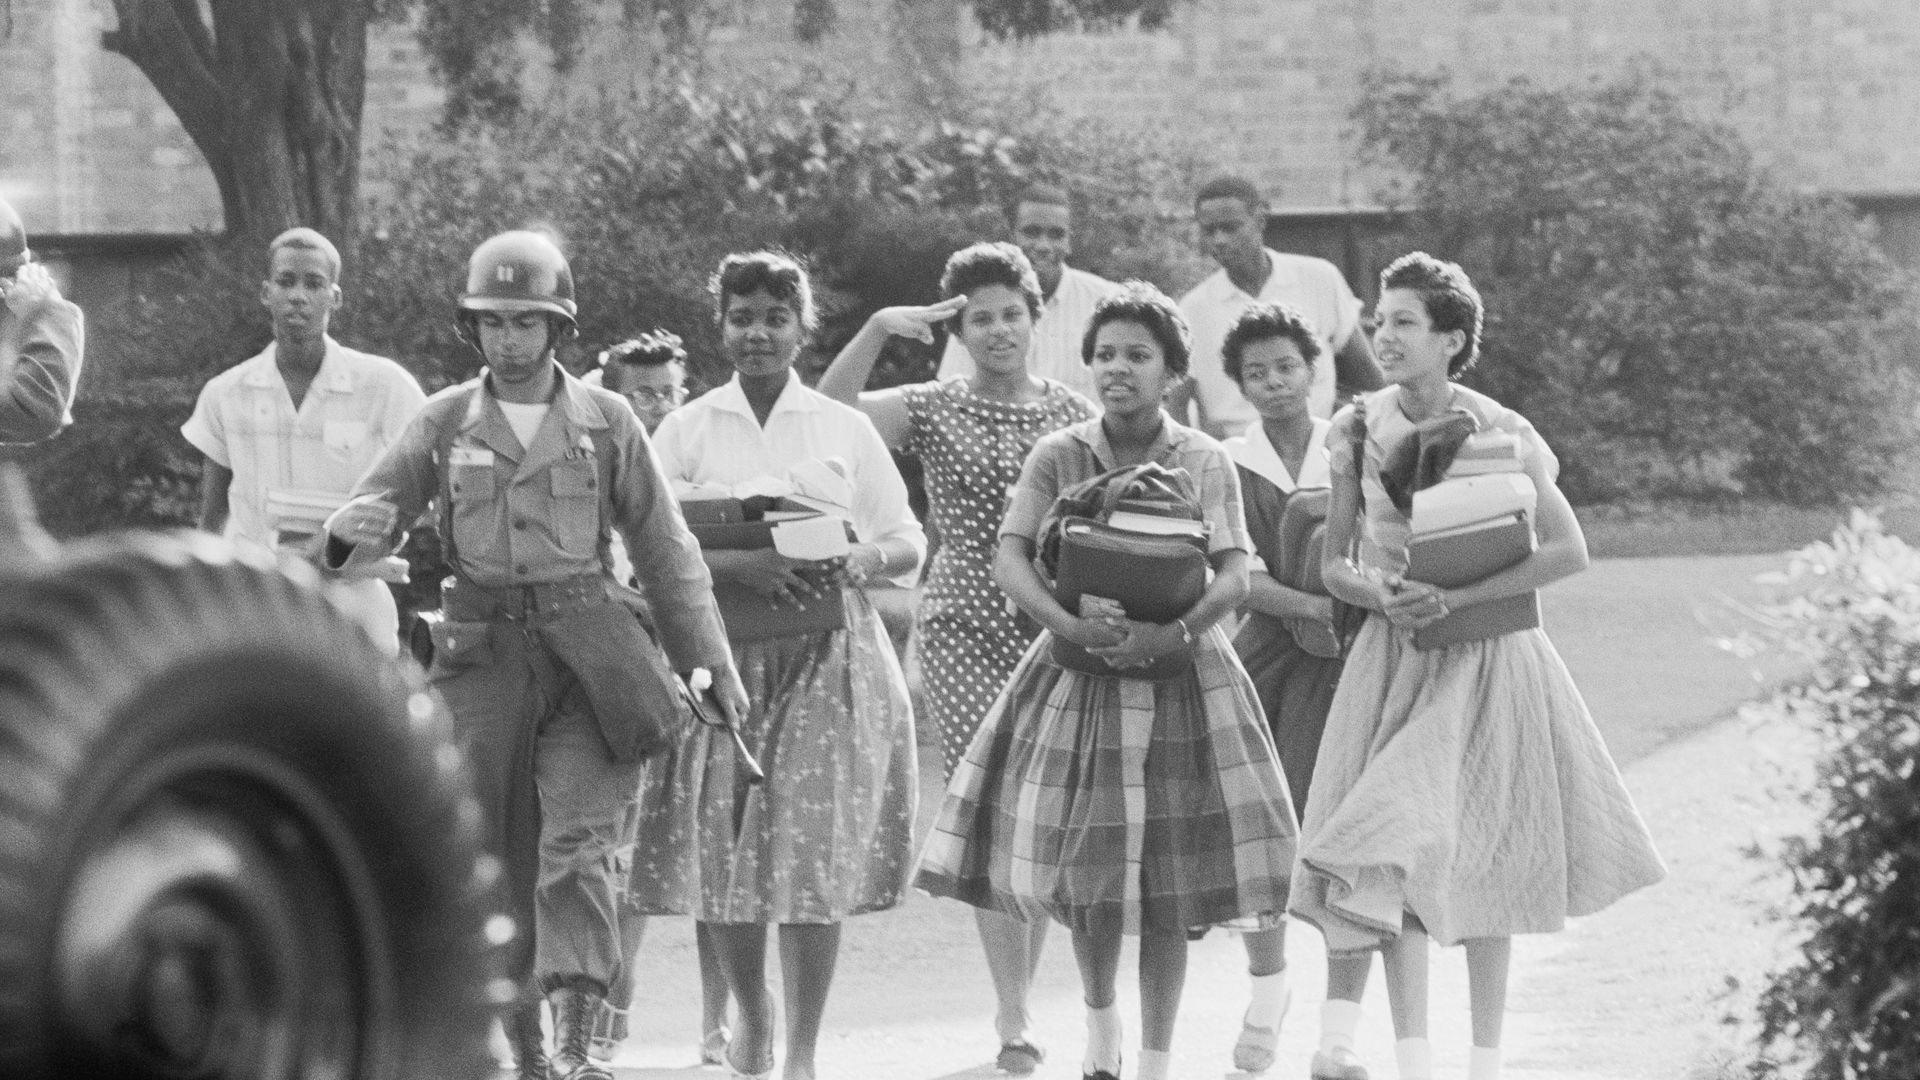 A photo of the Little Rock Nine being escorted by federal troops after school. 